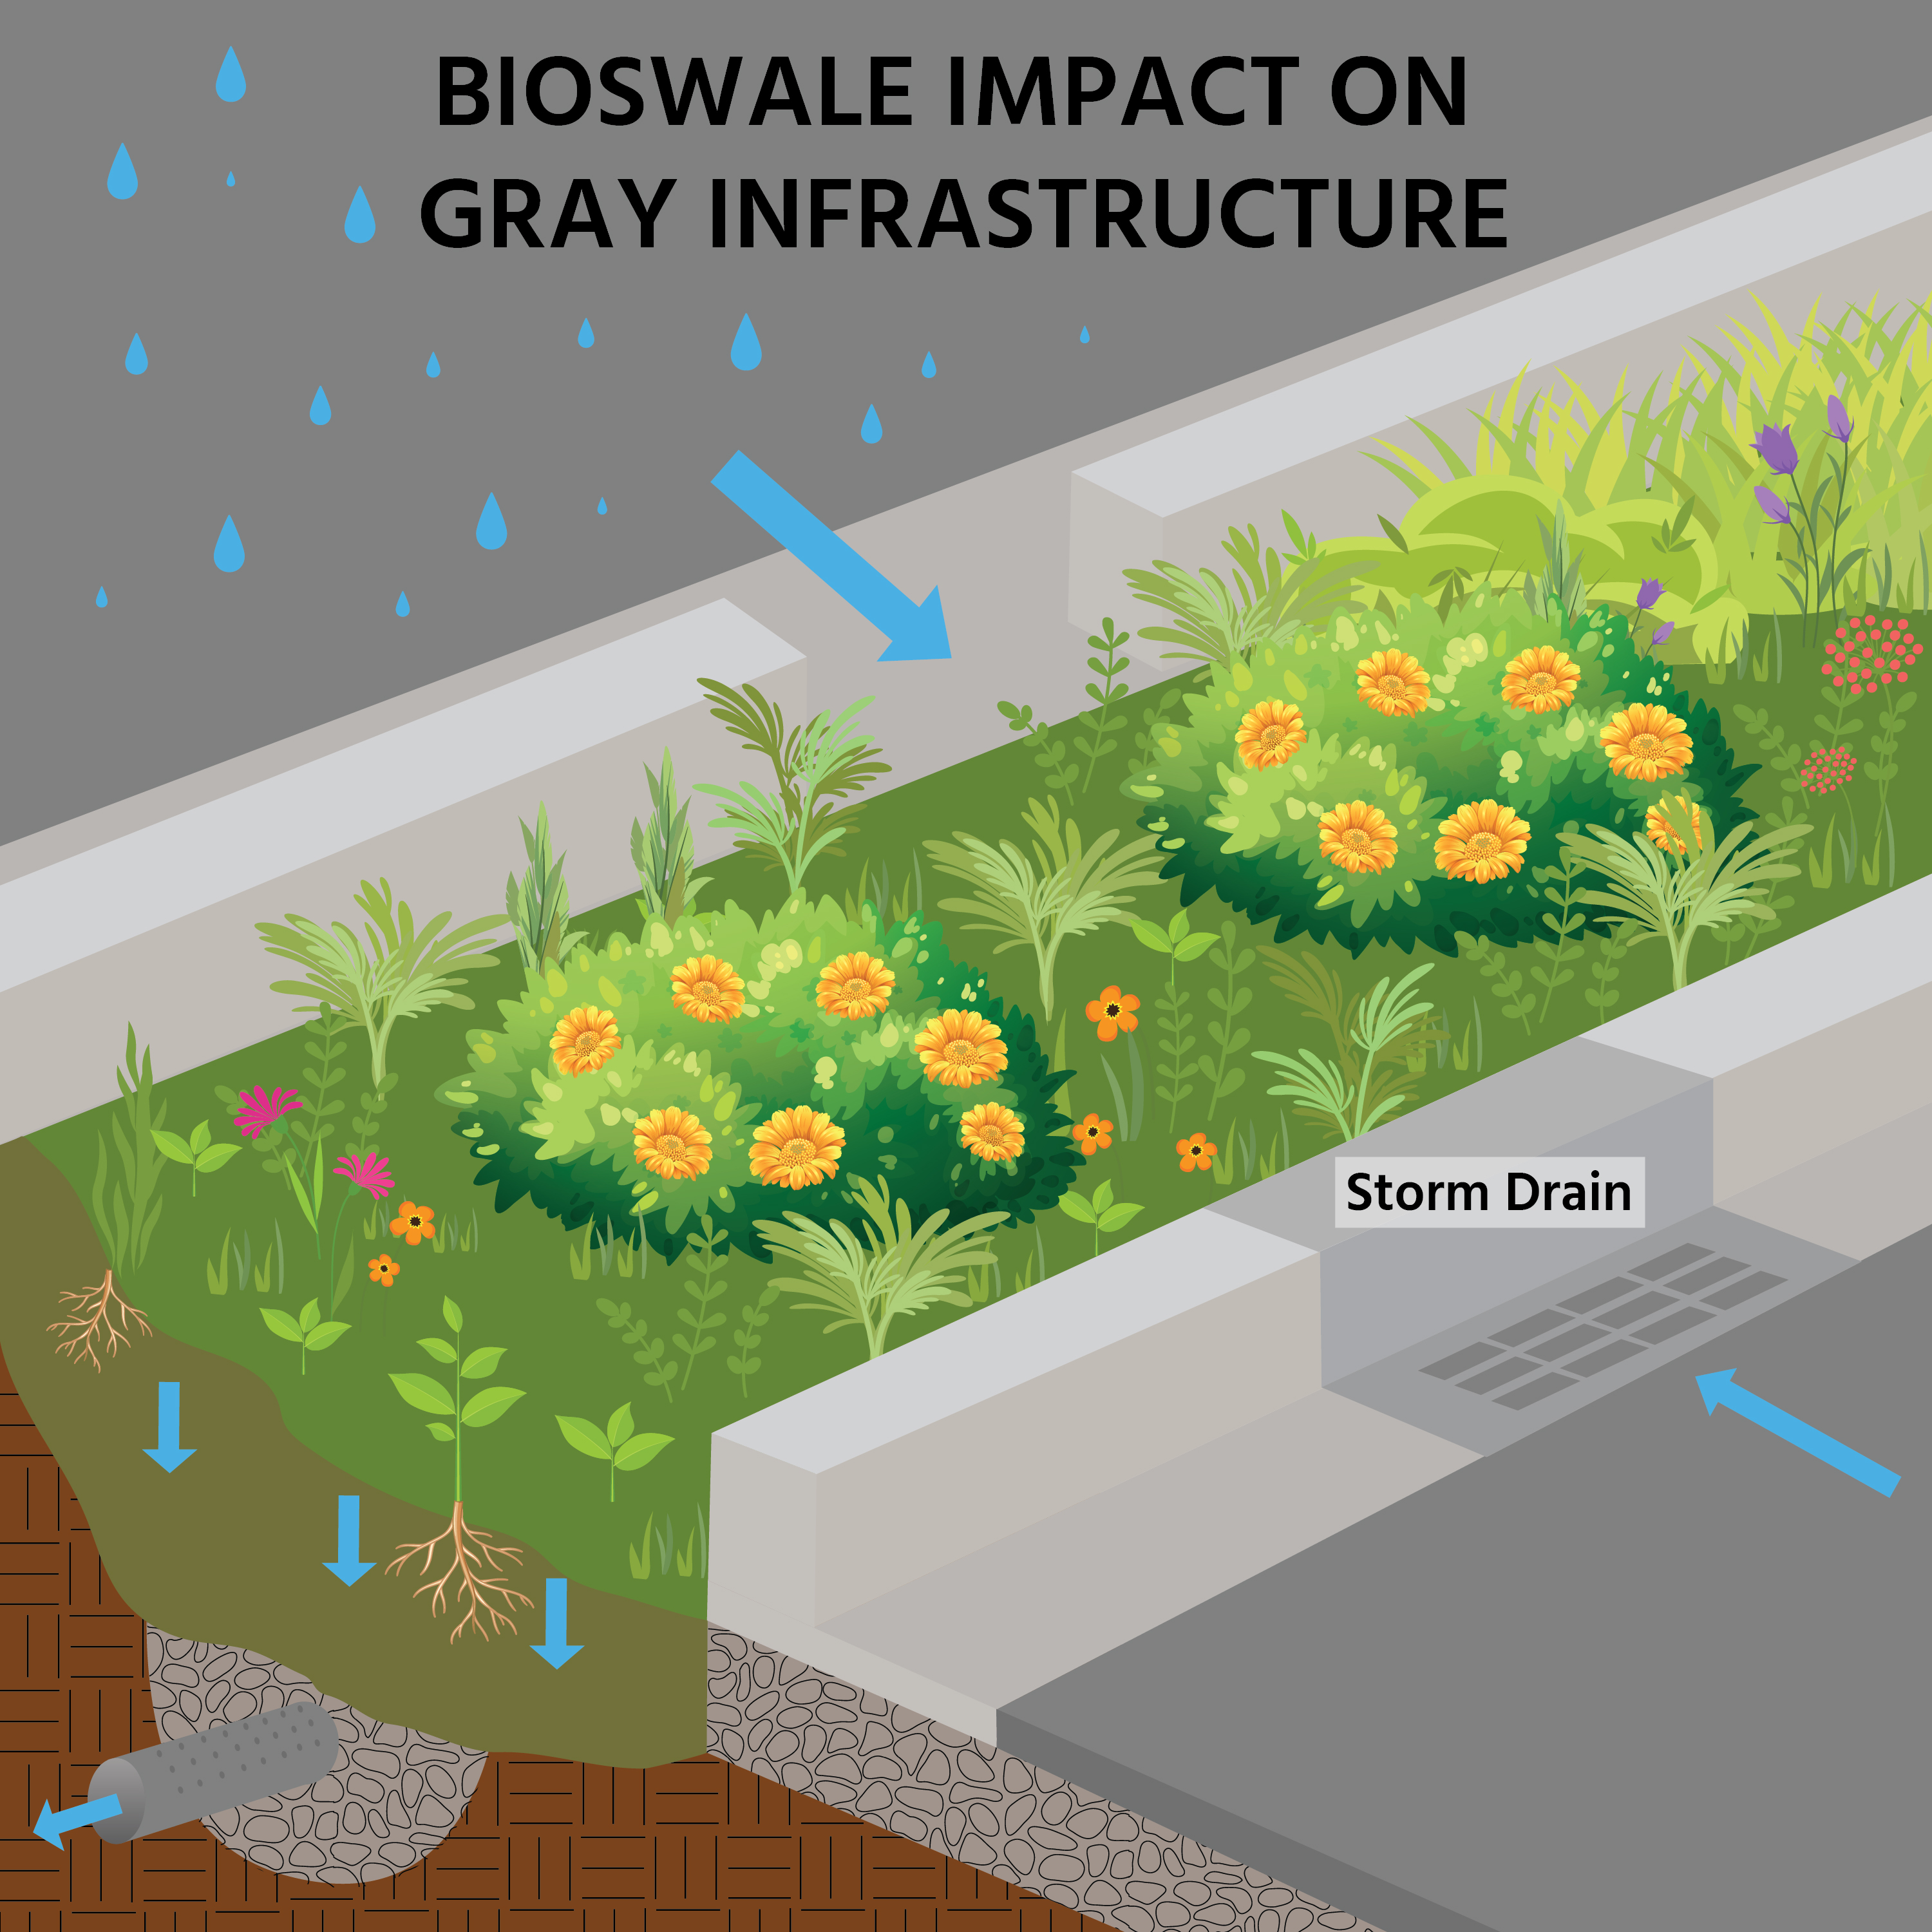 Educational illustration demonstrating how bioswales filter water before entering storm drains - bioswal impact on gray infrastructure